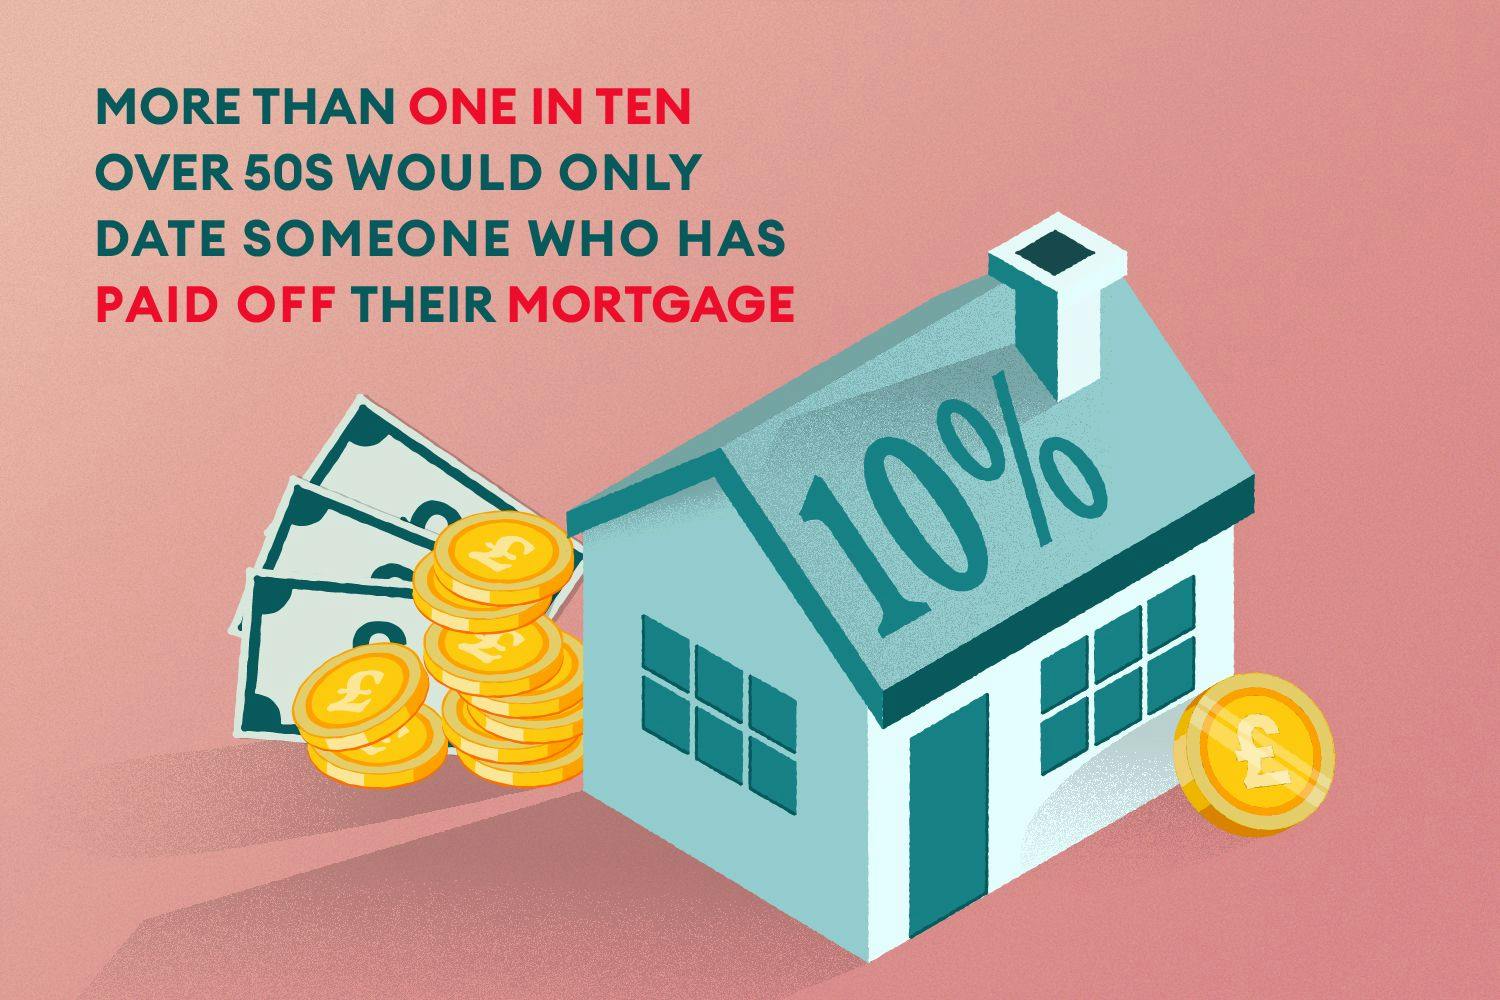 Illustration of a house with cash and coins with text that reads more than one in ten over 50s would only date someone who has paid off their mortgage